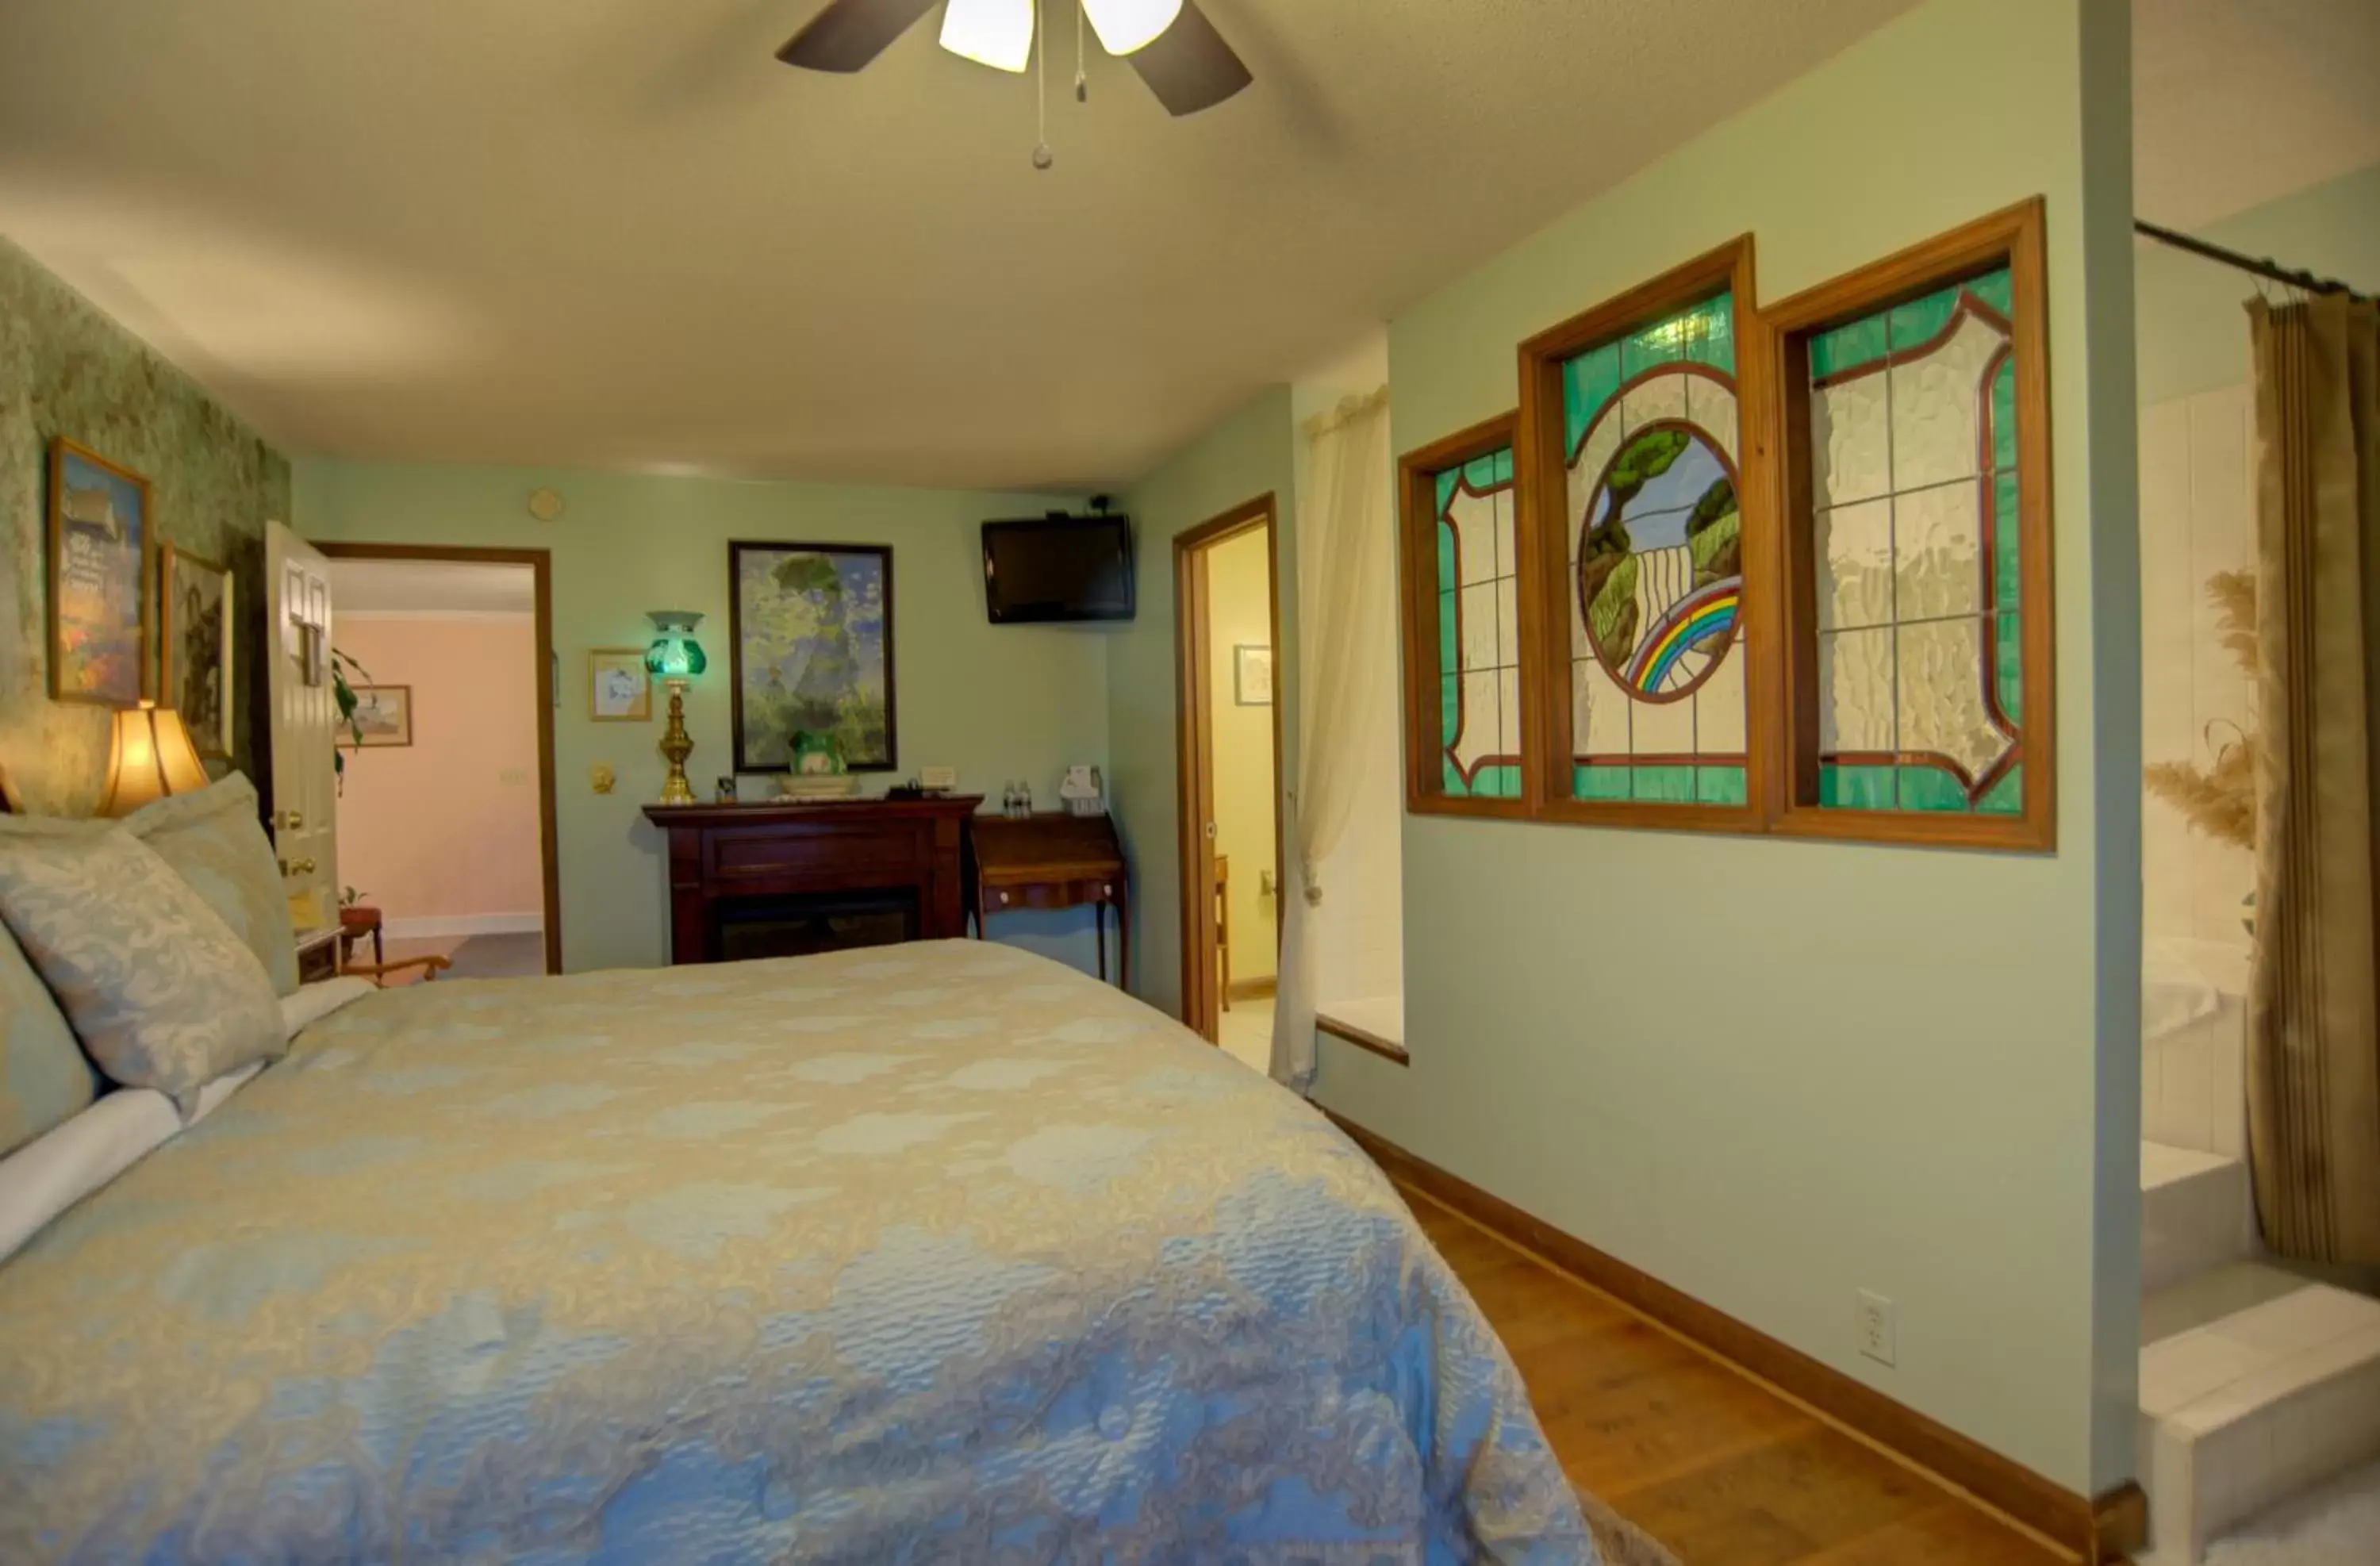 Deluxe King Room with Balcony in Blue Mountain Mist Country Inn